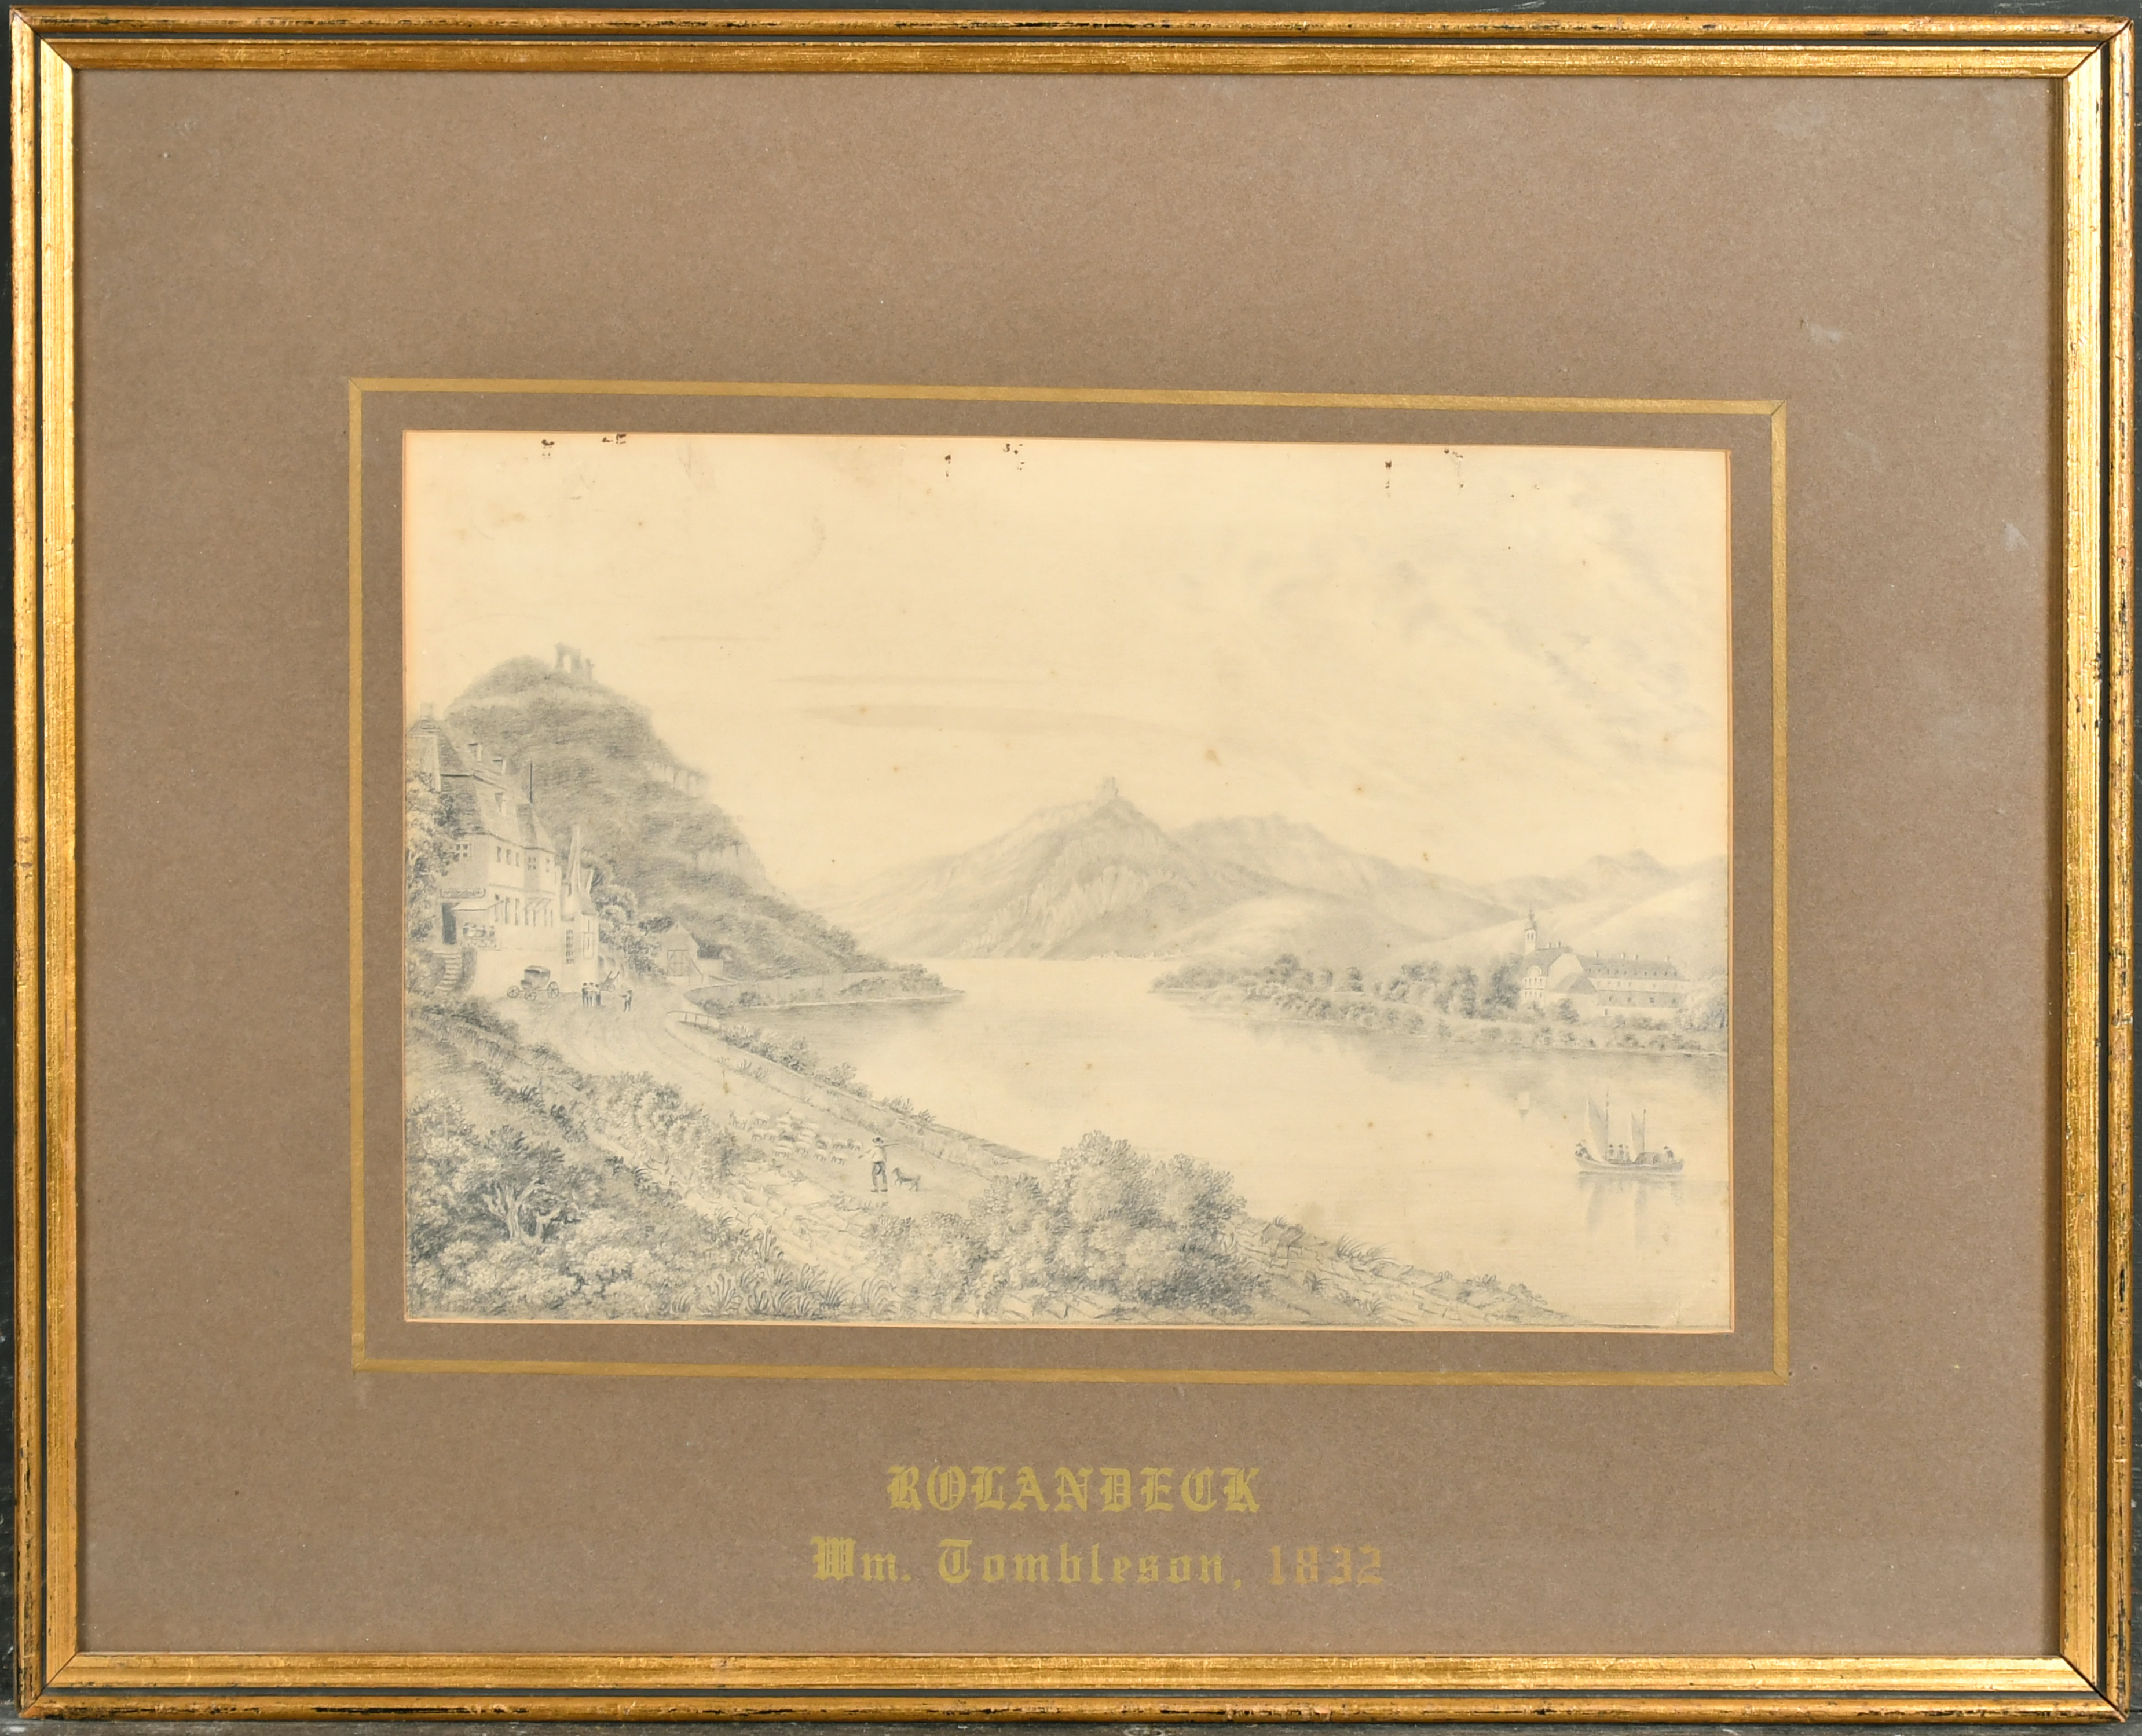 Attributed to William Tombleson (1795-1846) British. "Rolandeck", Pencil, Inscribed on the mount, - Image 2 of 5